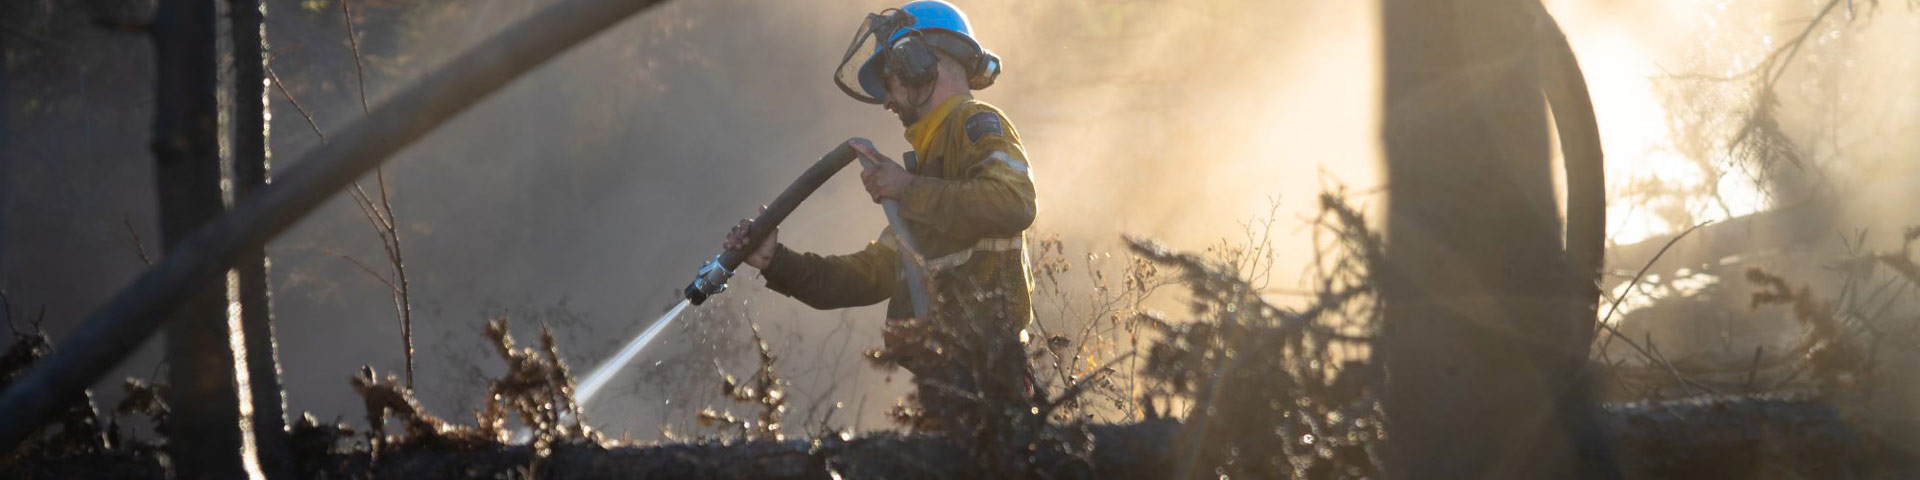 A fire crew member sprays down a burning log with a fire hose during the Chetamon wildfire in Jasper National Park